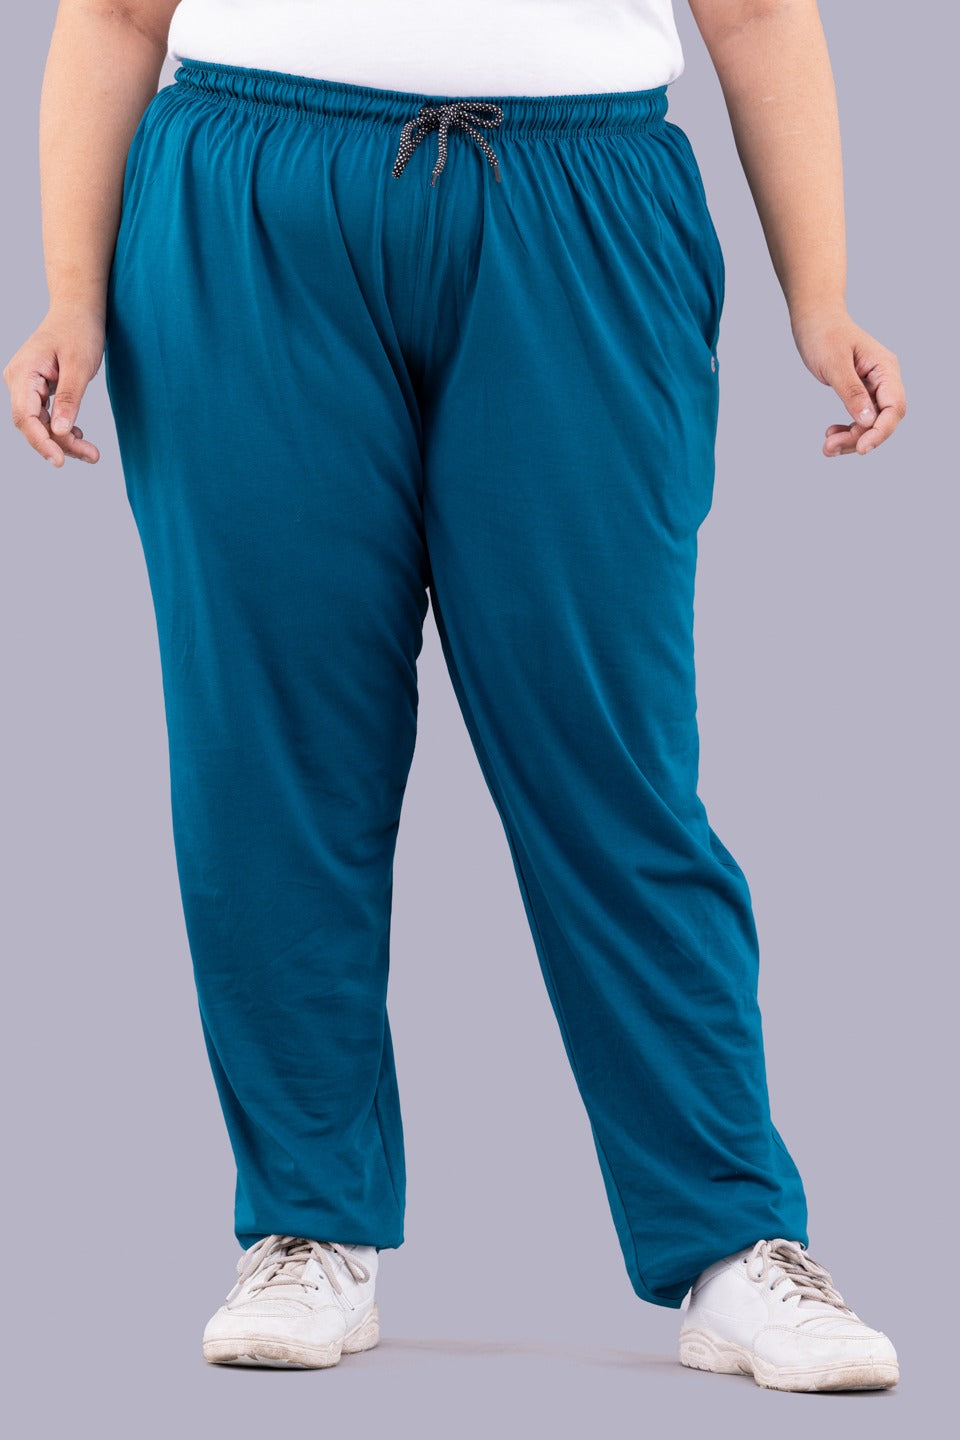 Comfy Teal Blue Cotton Plus Size Track Pants For Women At Best Prices